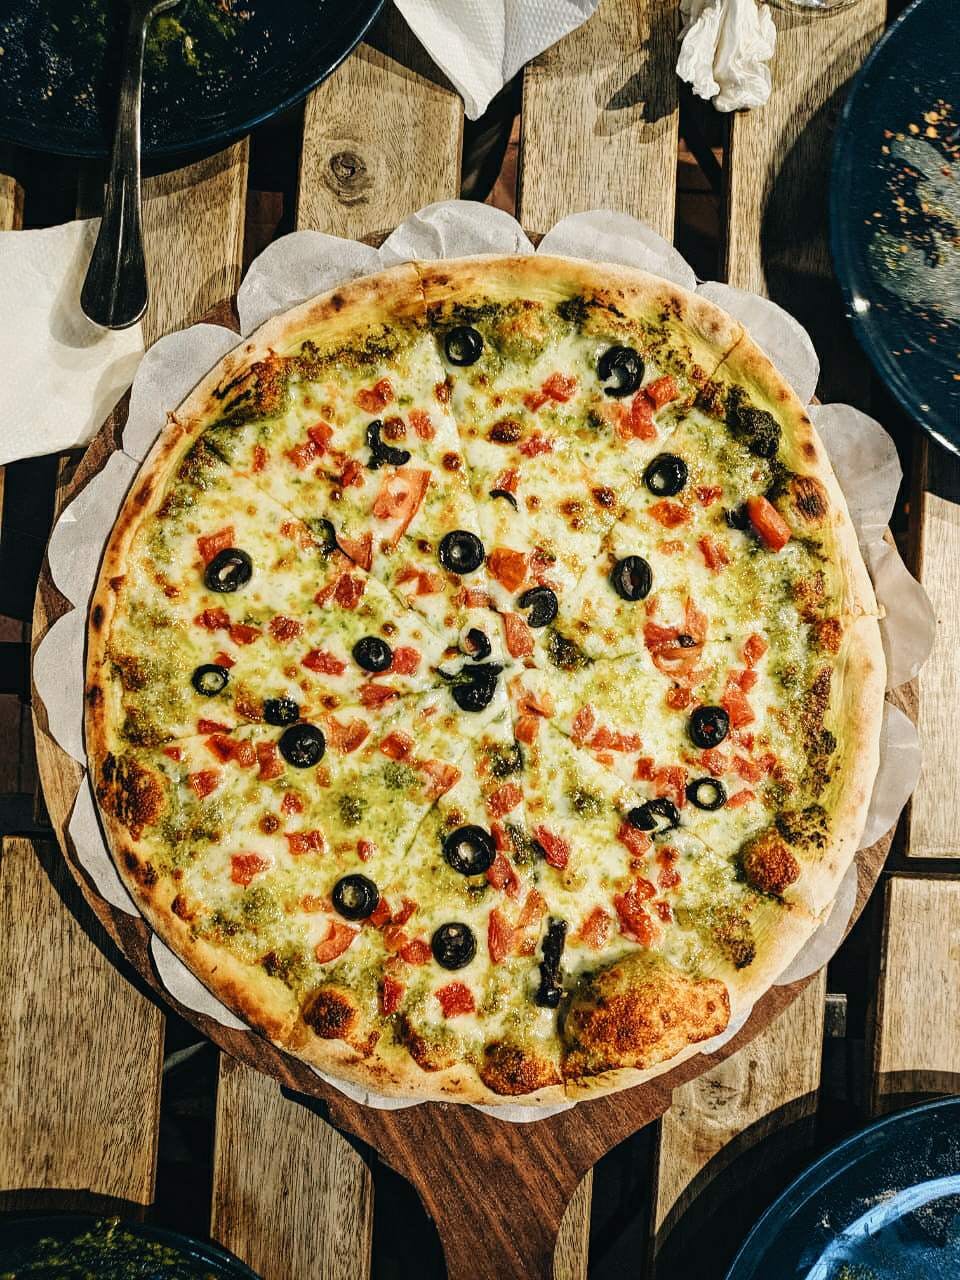 Dish,Food,Cuisine,Ingredient,Quiche,Pizza,Tarte flambée,Baked goods,Pizza cheese,Italian food